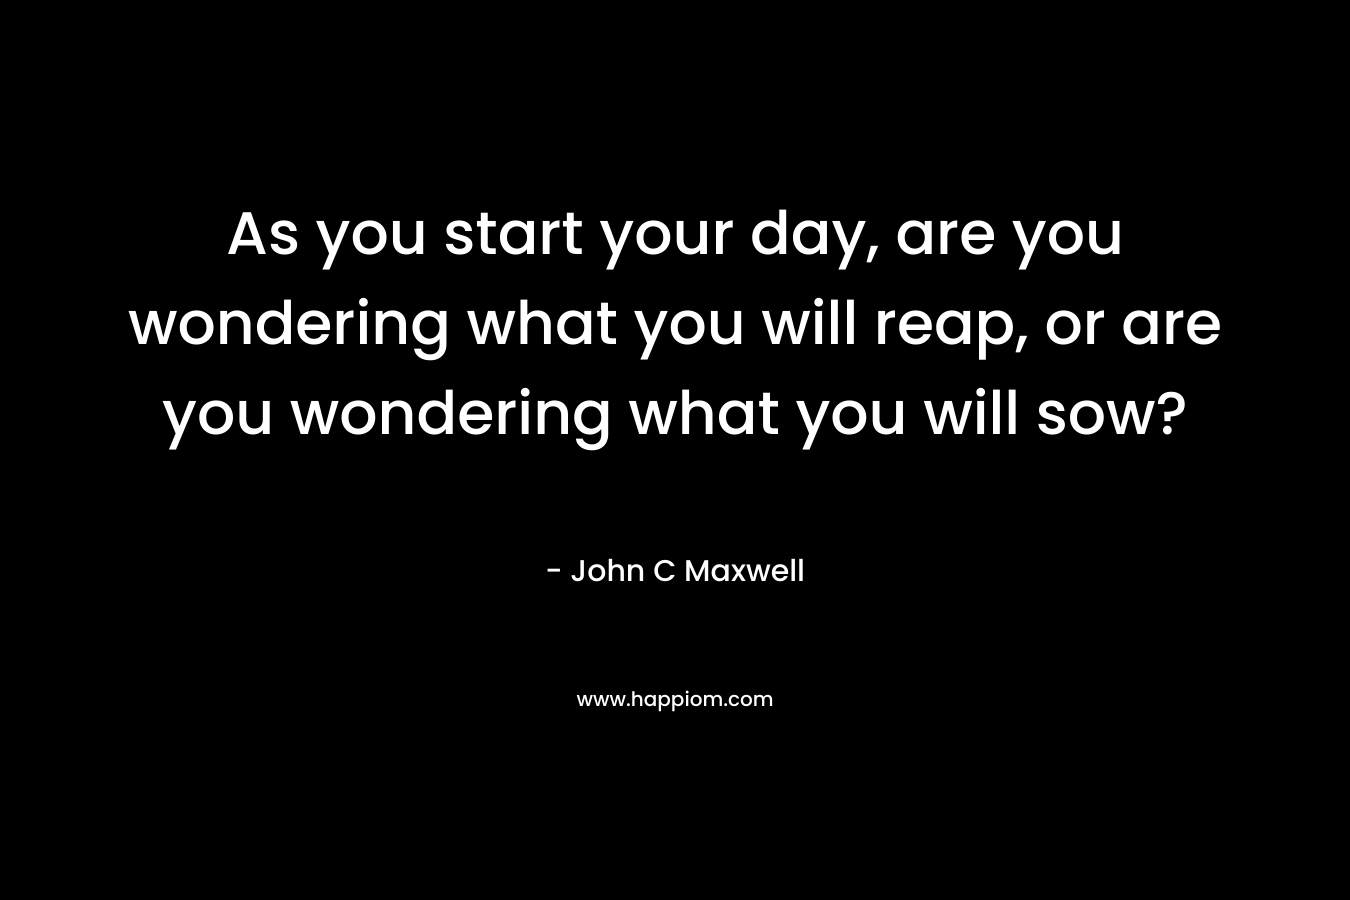 As you start your day, are you wondering what you will reap, or are you wondering what you will sow?